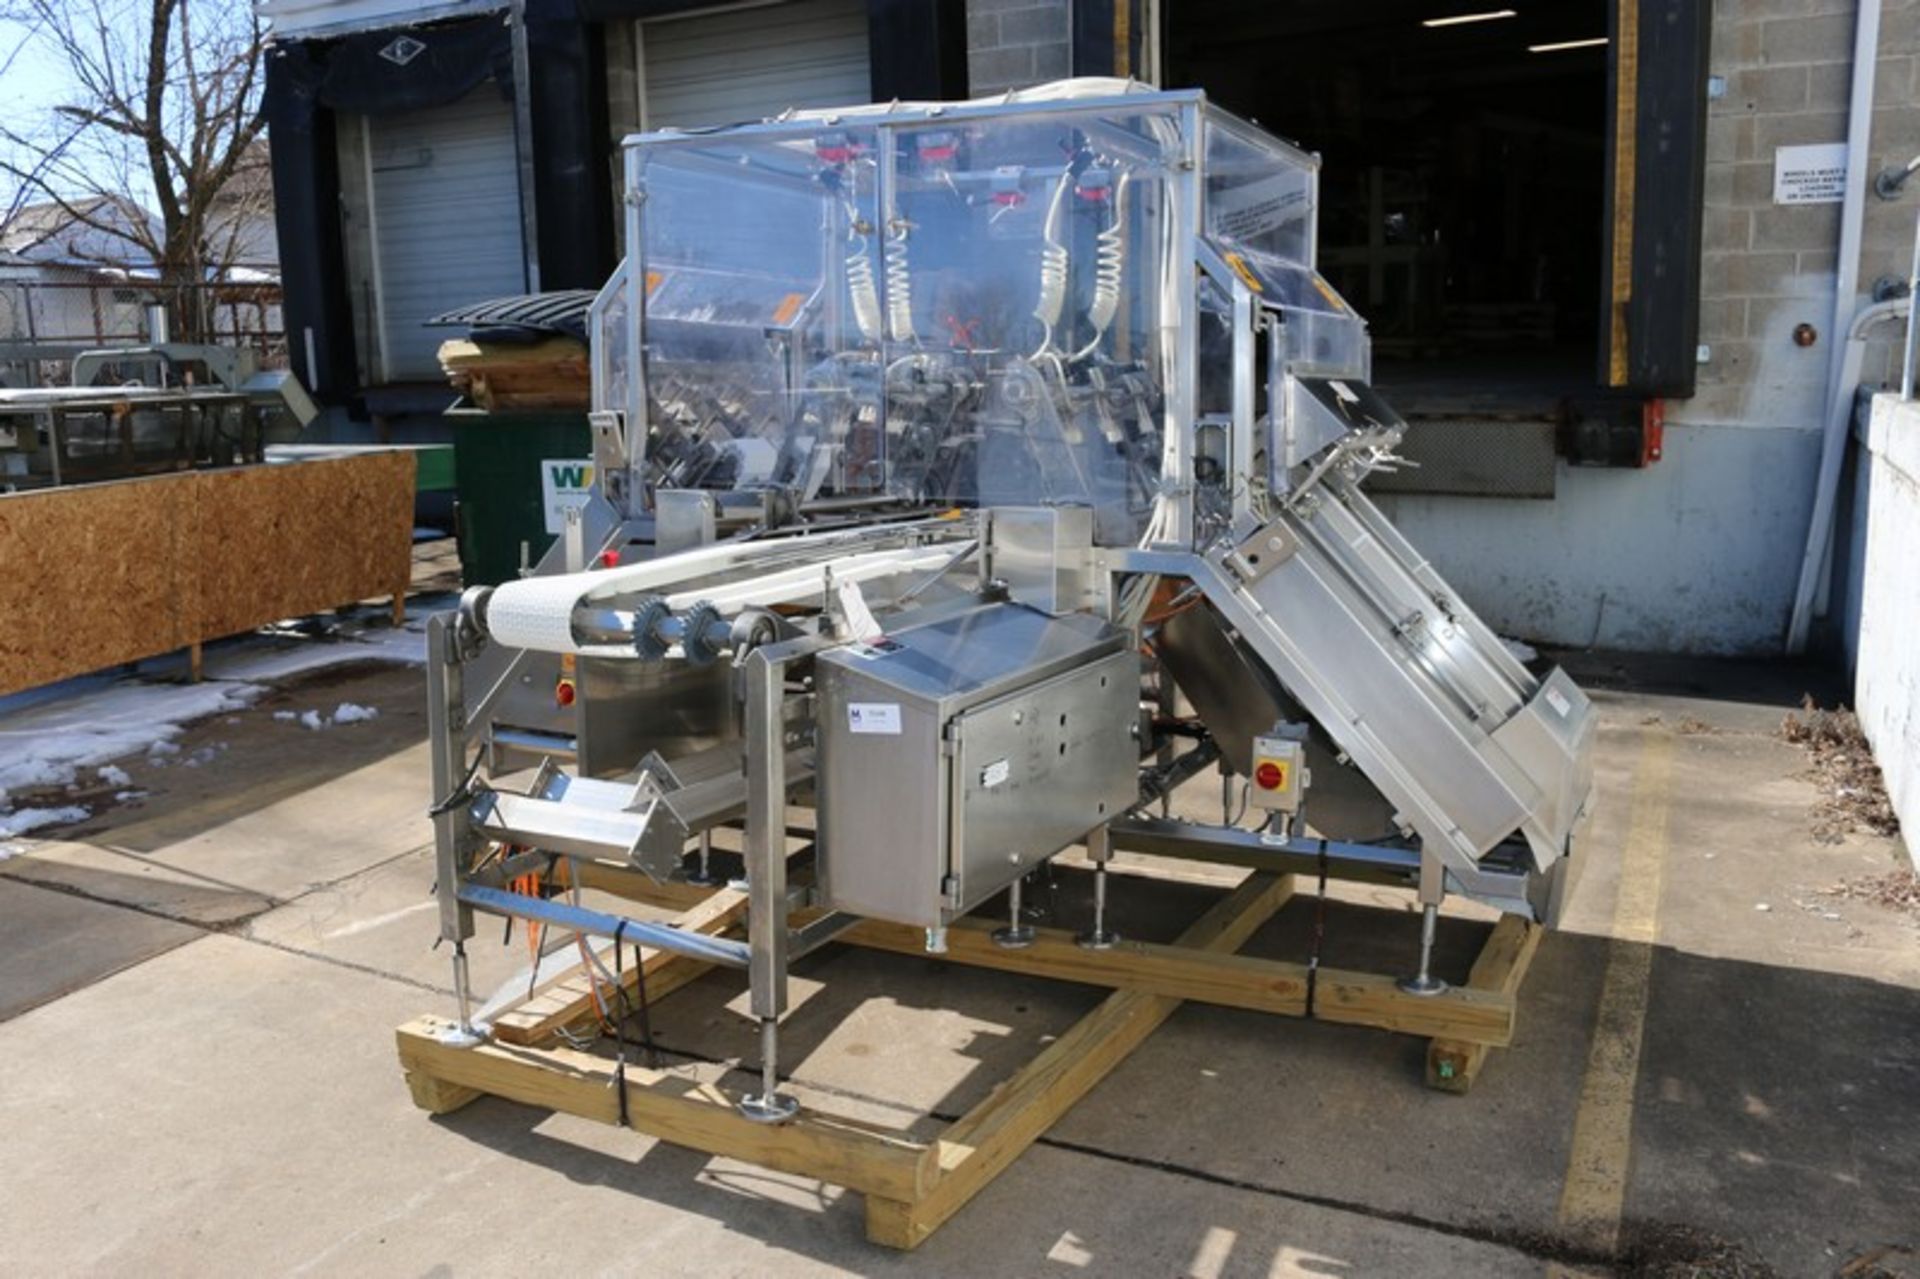 Raque S/S Tray Dispenser,2-Lanes of Aprox. 8" W Outfeed Conveyor, with 4-Head Pick N' Place Vacuum - Image 11 of 11